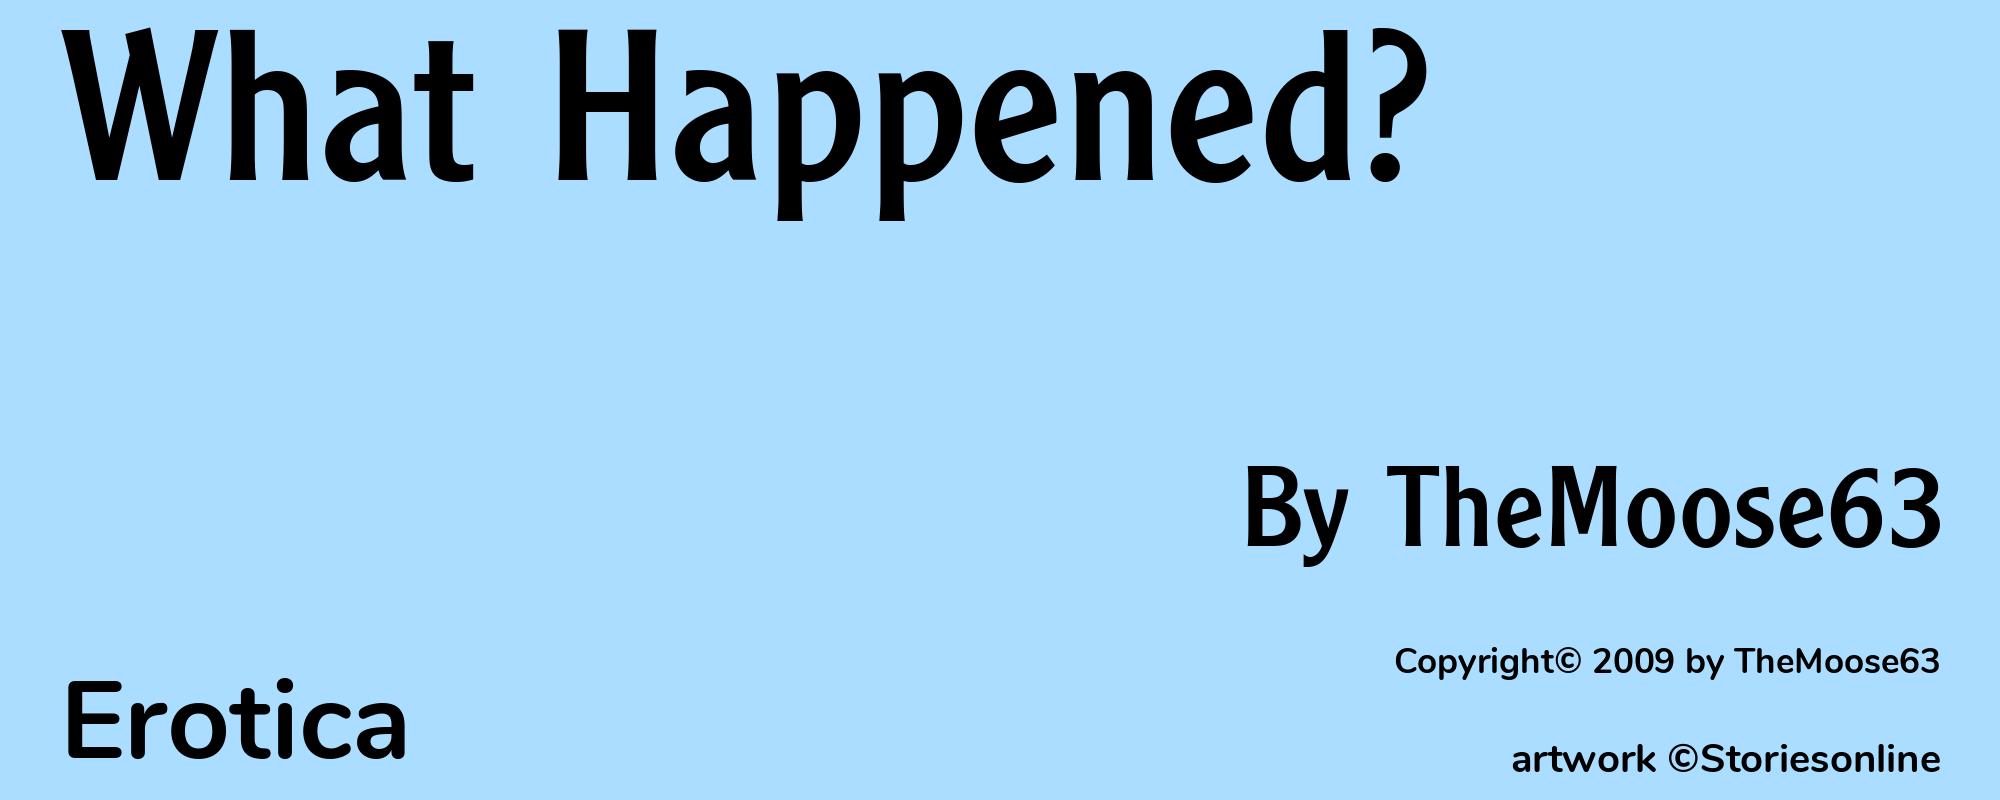 What Happened? - Cover